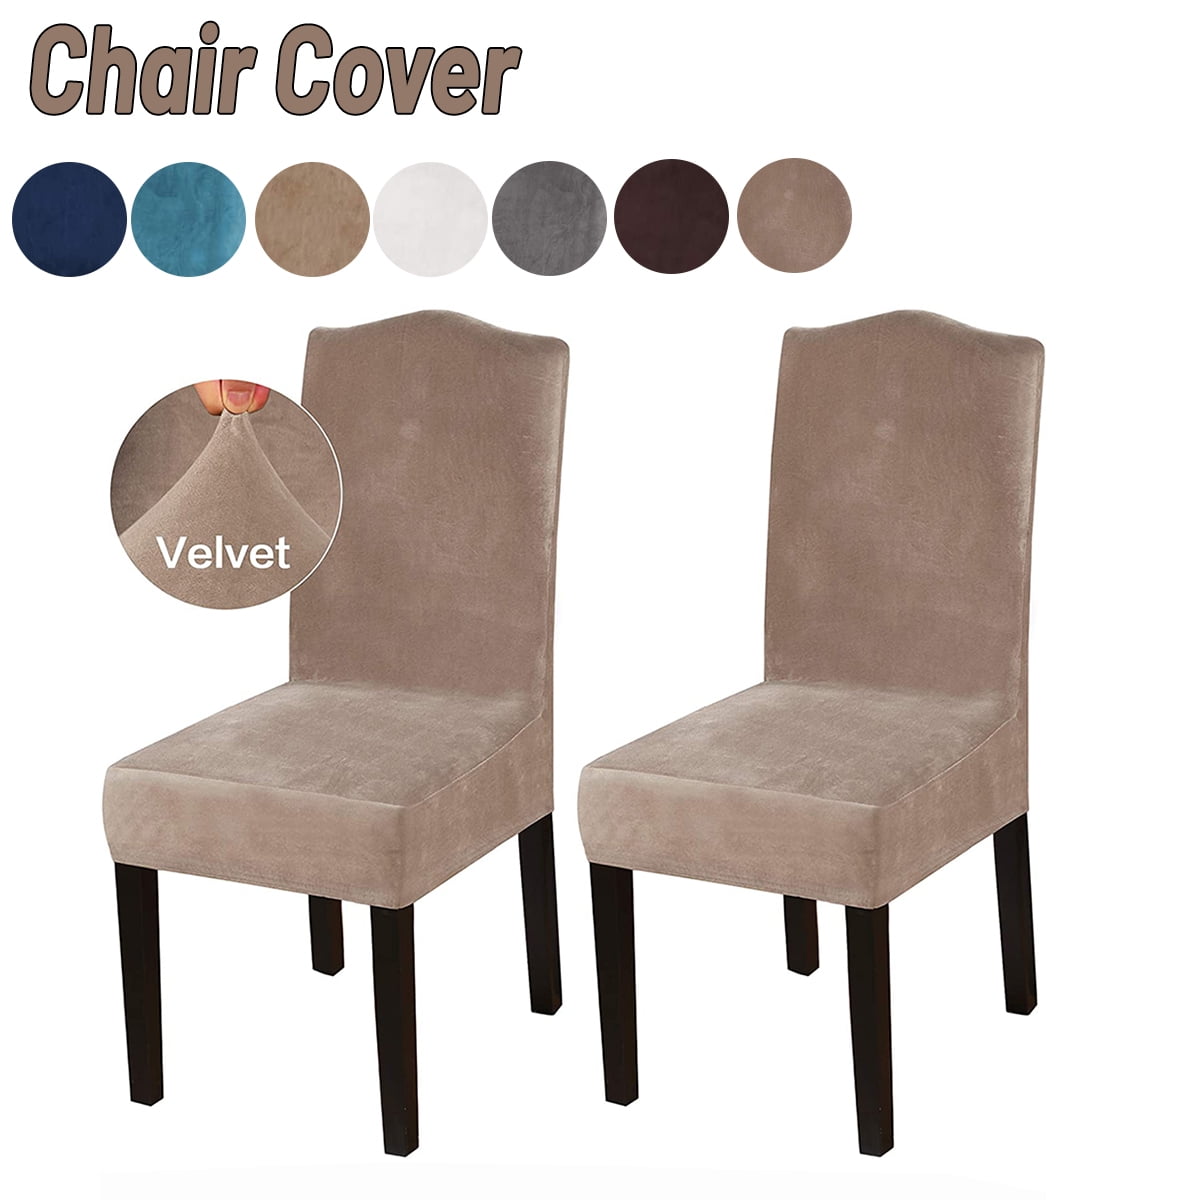 Luxury Velvet Spandex Chair Covers, Large Seat Covers For Dining Room Chairs